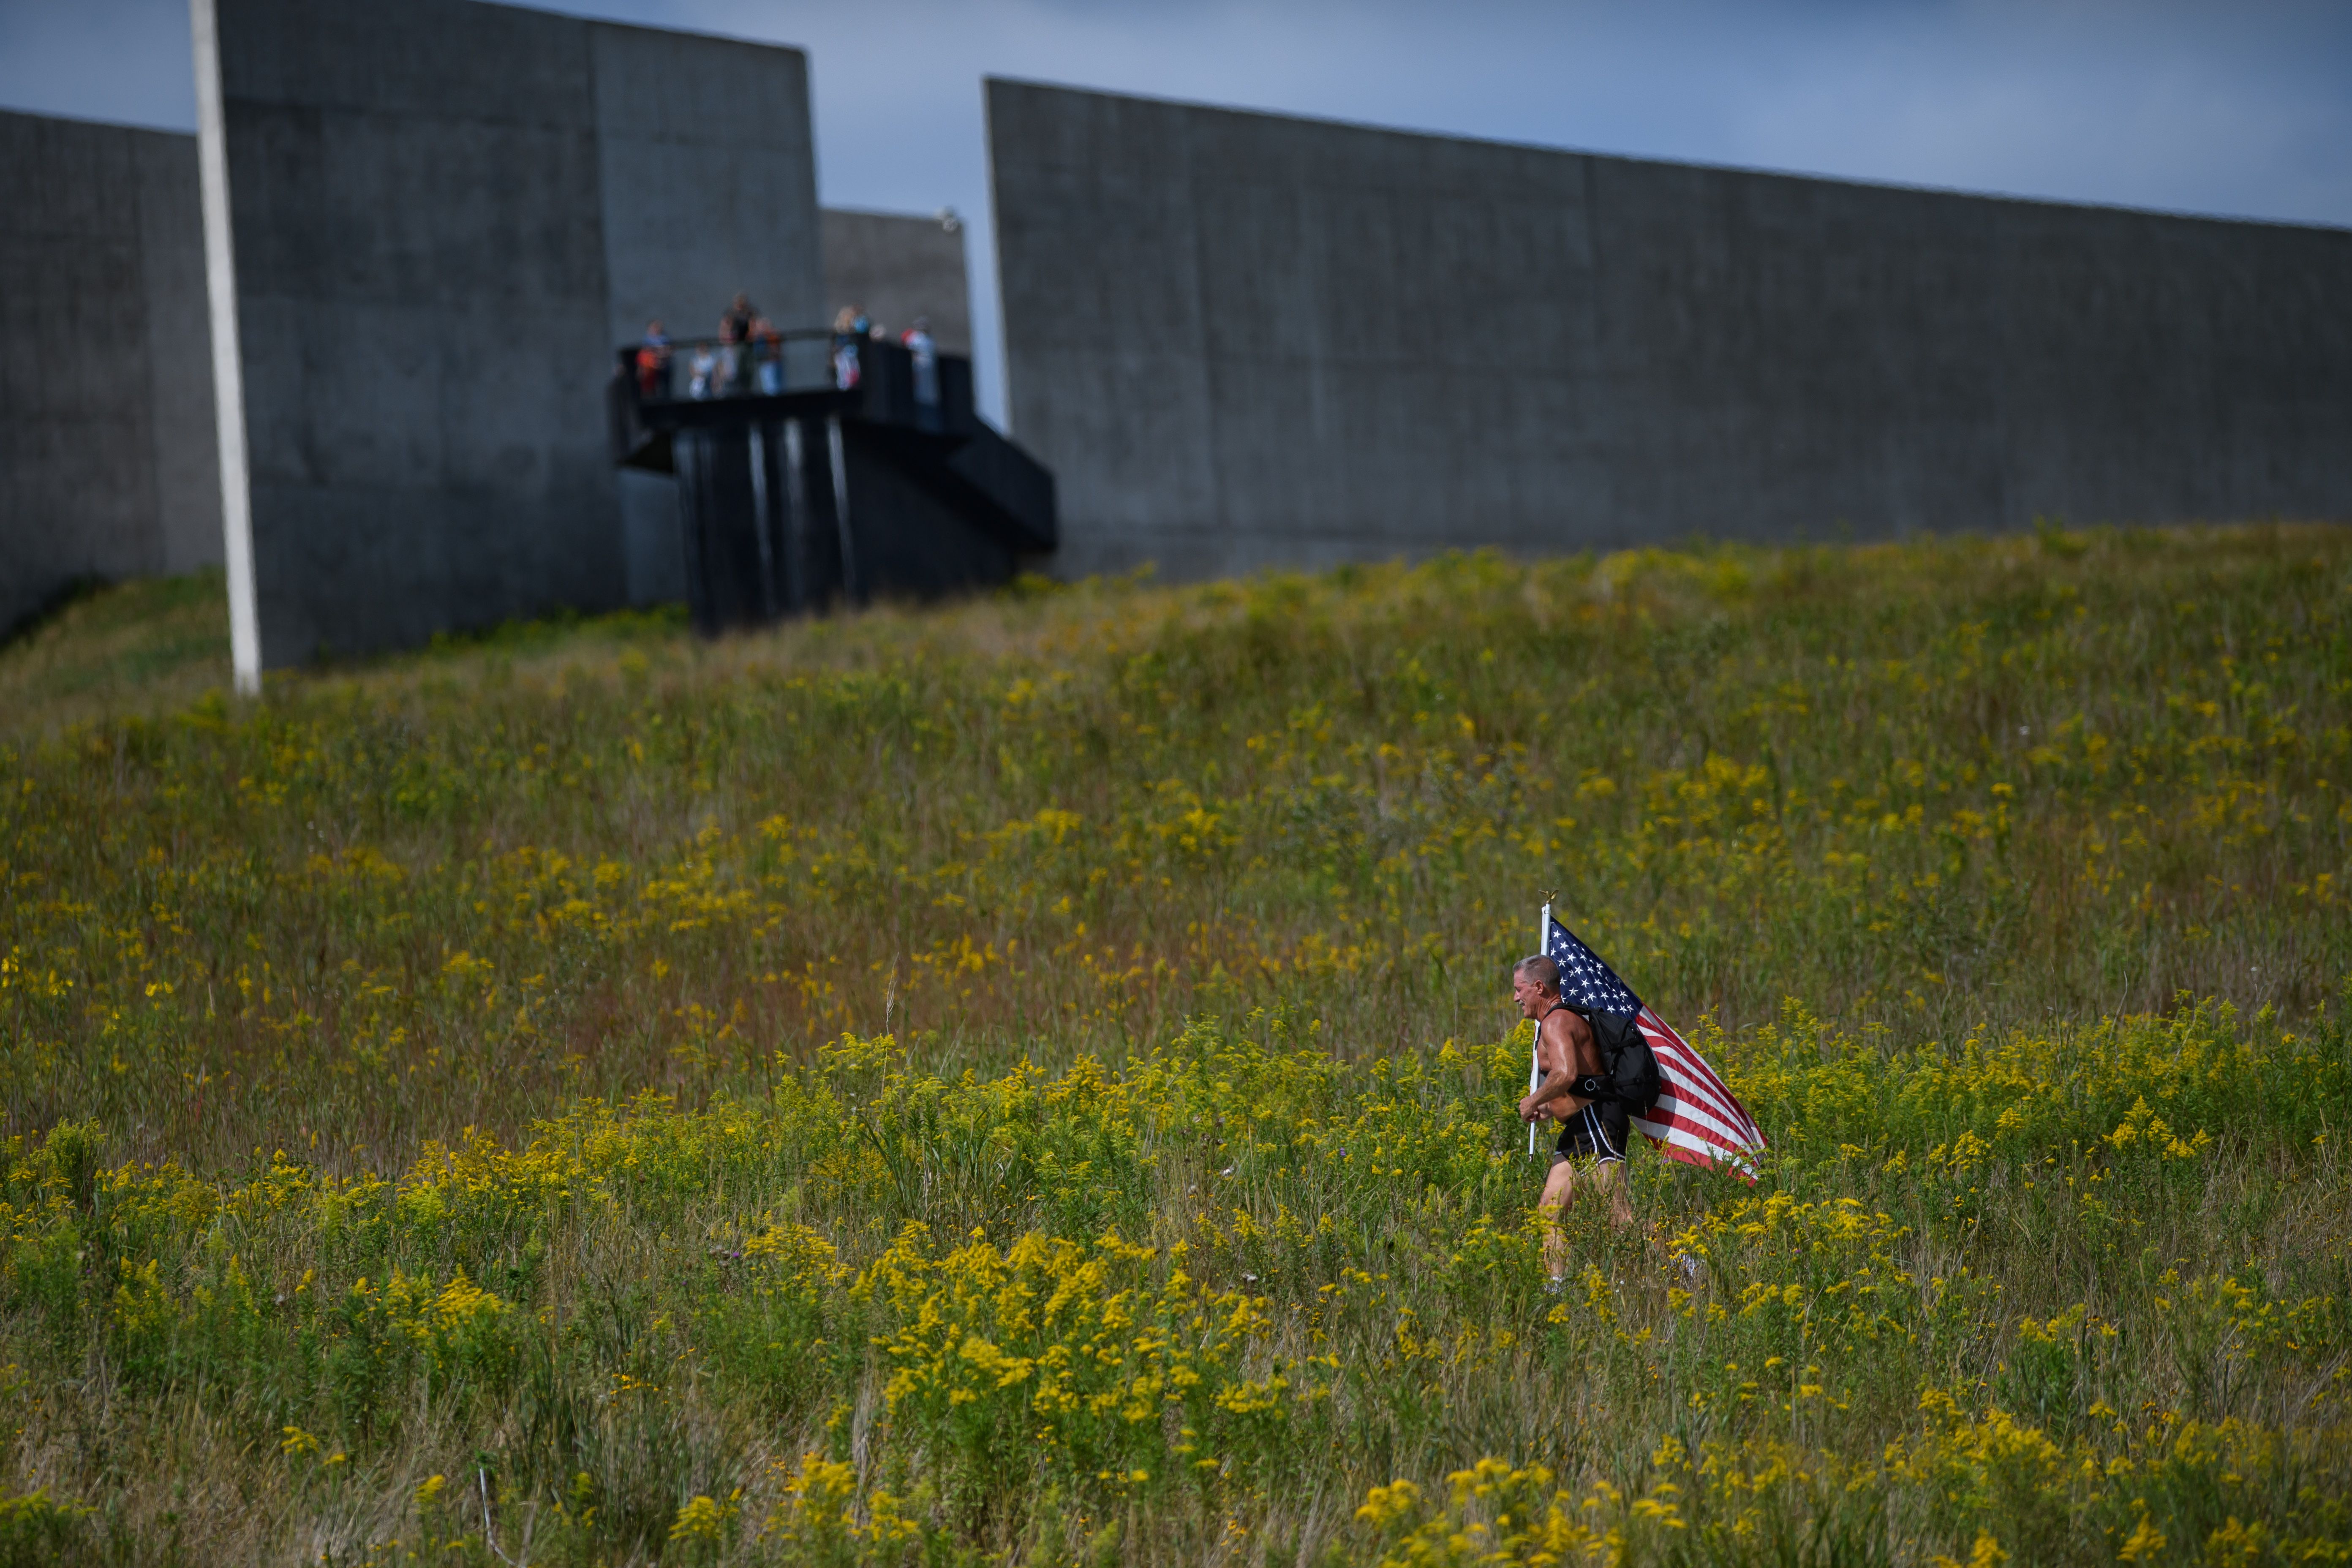 A person running through goldenrod with an American flag at the Flight 93 National Memorial commemoration.